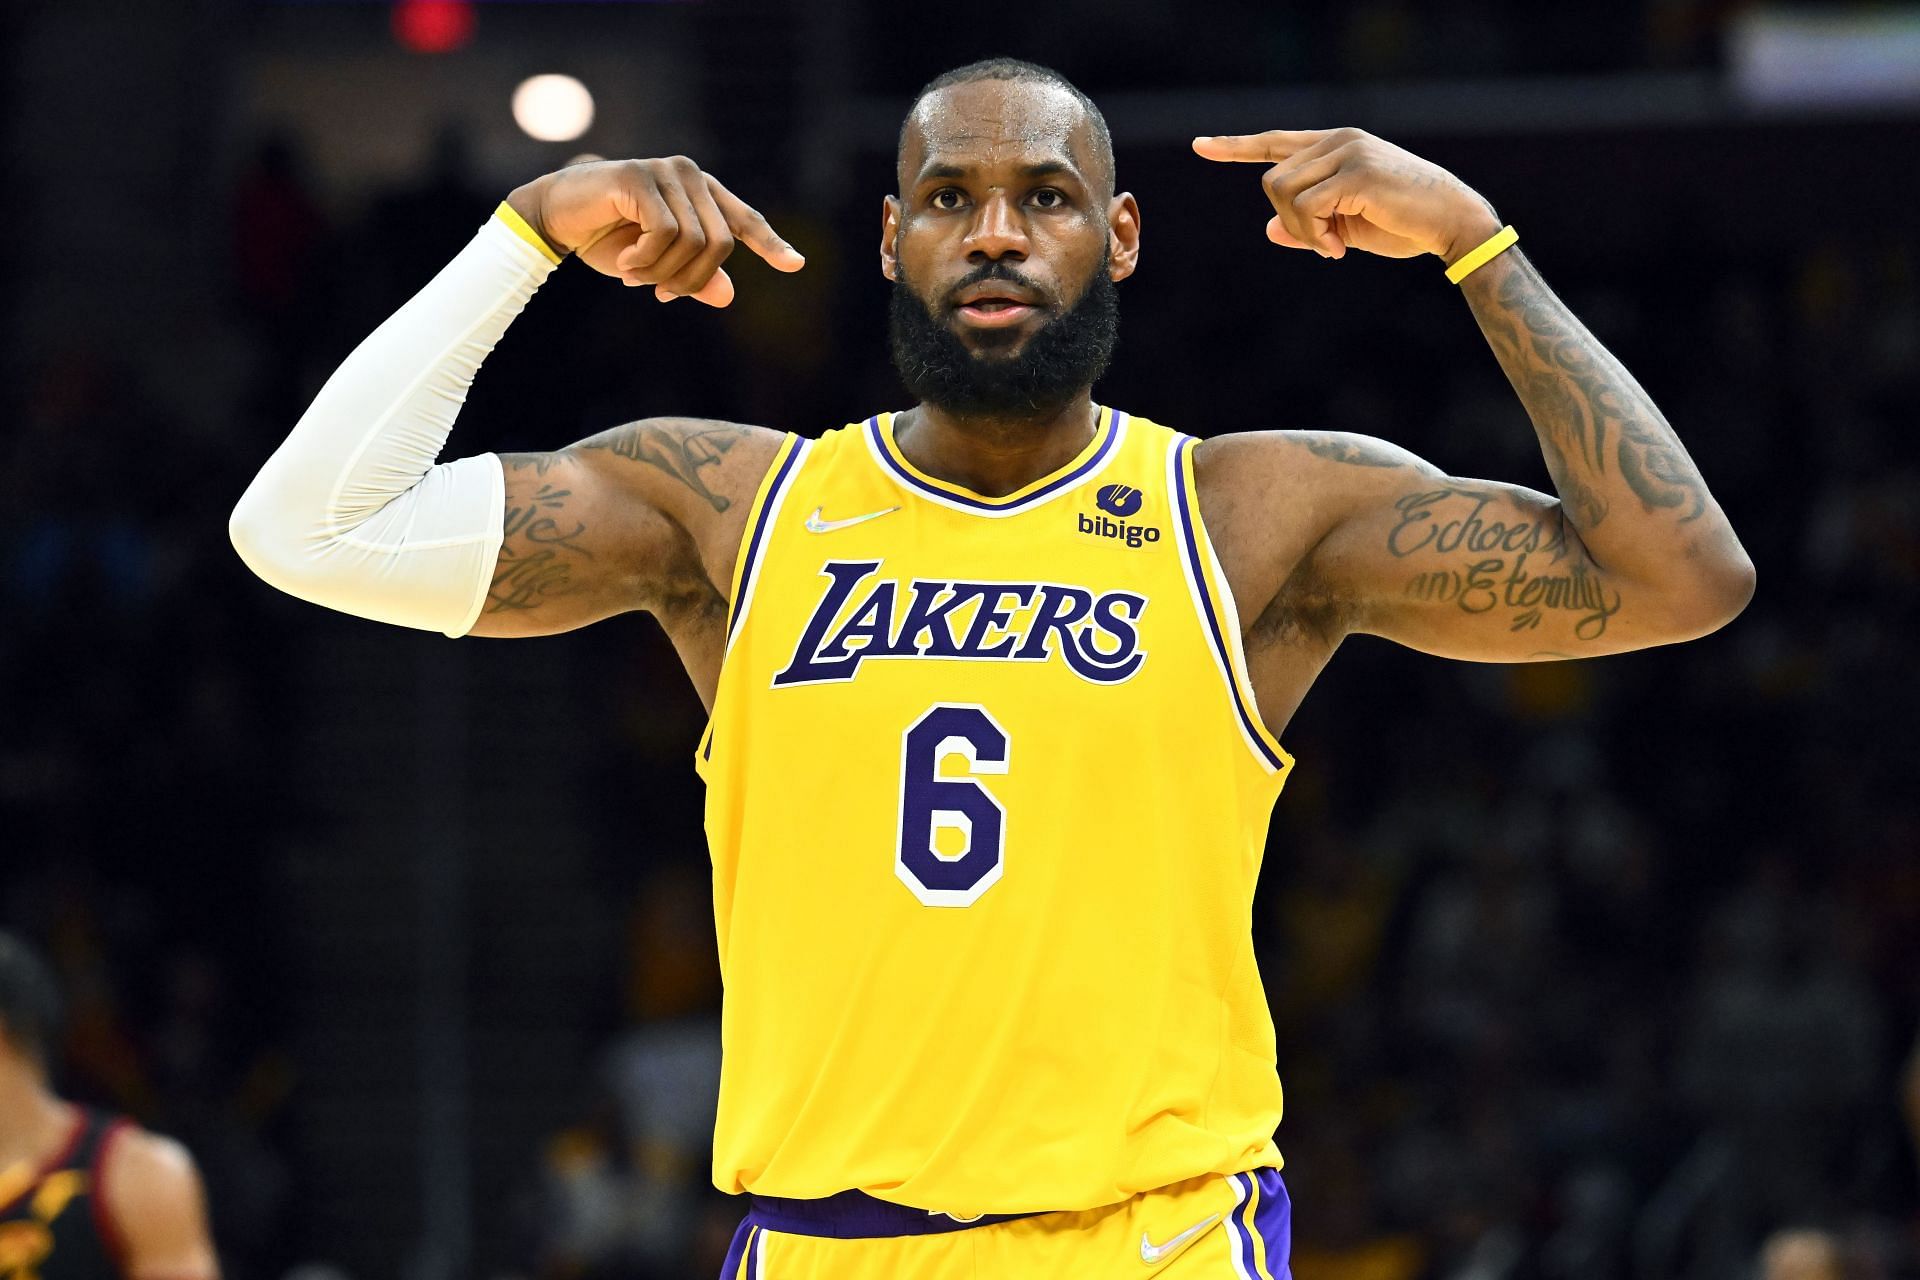 LeBron James #6 of the Los Angeles Lakers celebrates during the fourth quarter against the Cleveland Cavaliers at Rocket Mortgage Fieldhouse on March 21, 2022 in Cleveland, Ohio.